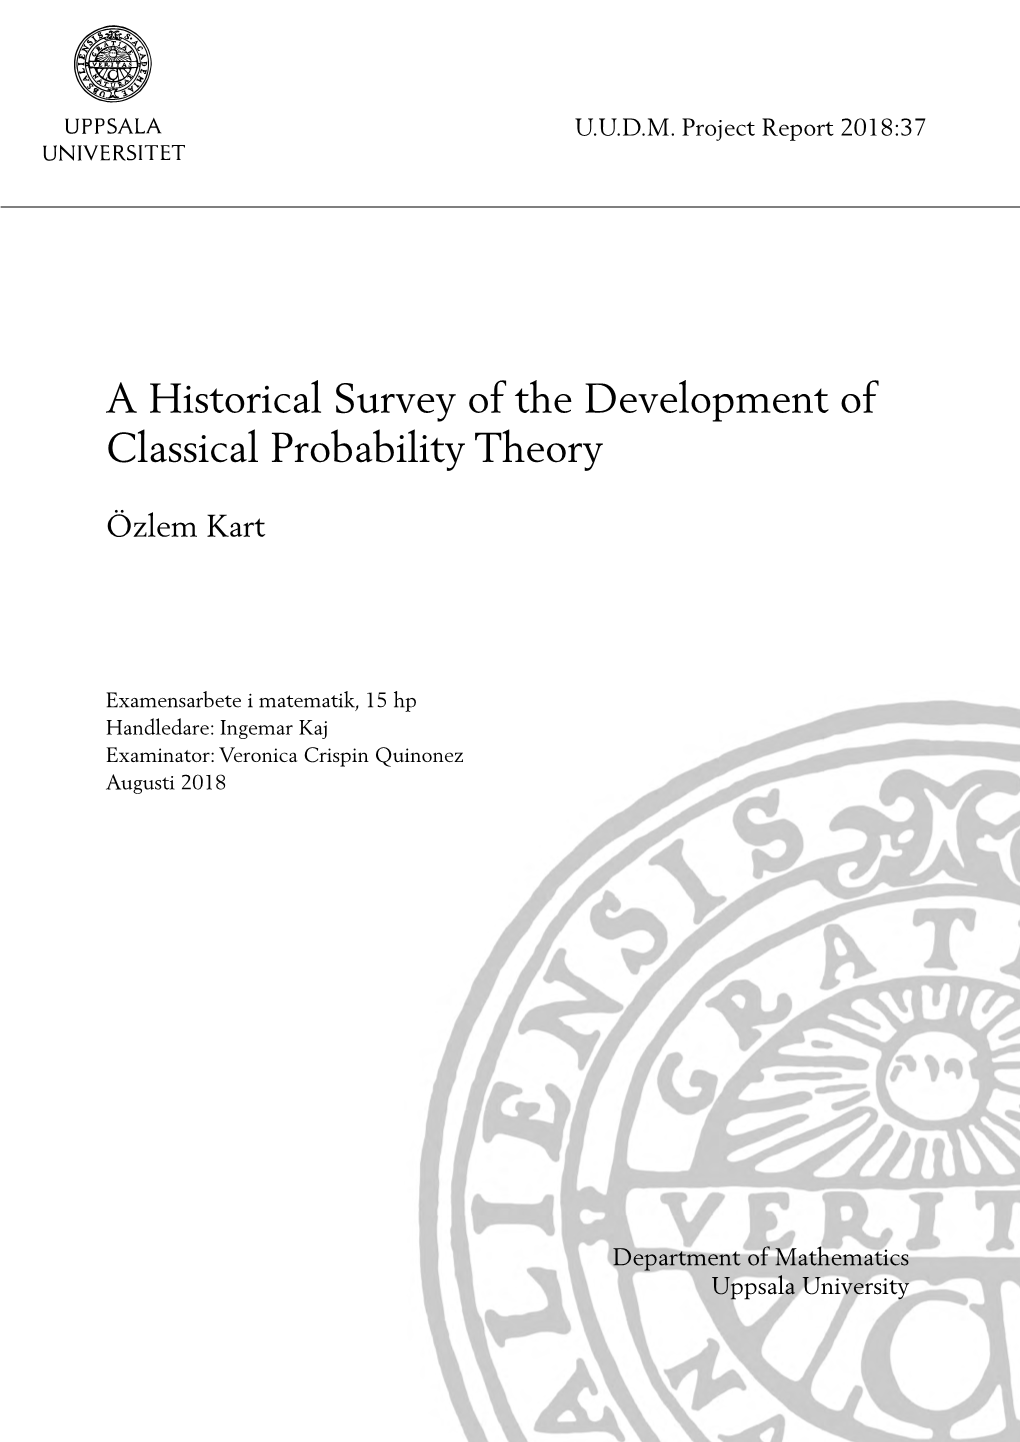 A Historical Survey of the Development of Classical Probability Theory